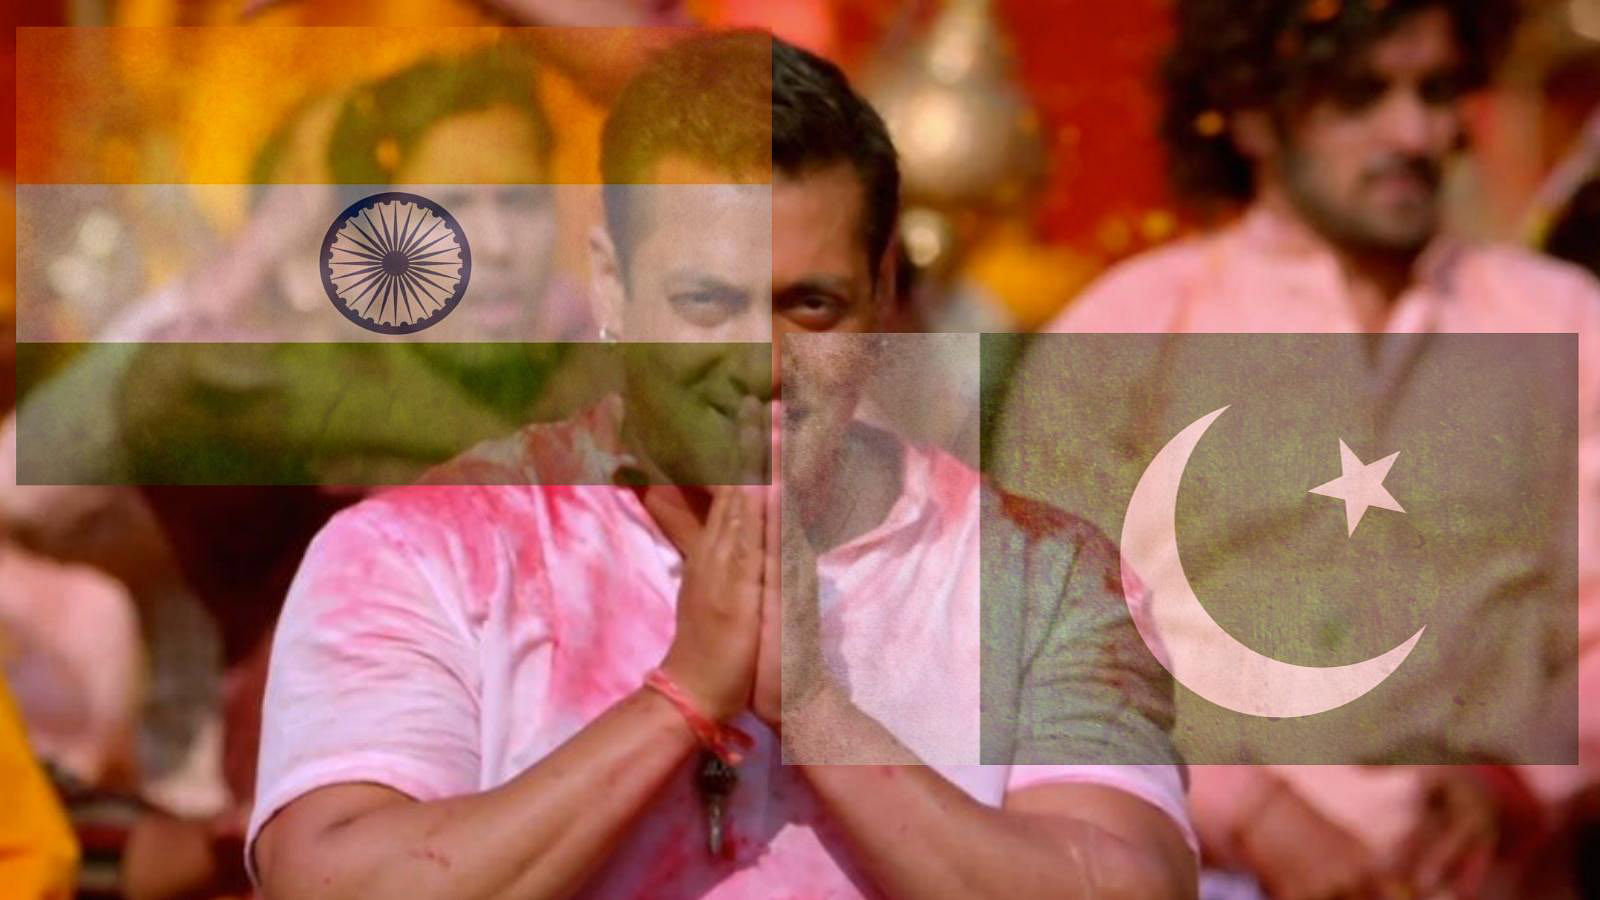 <i>Bajrangi Bhaijaan </i>subverts the popular India-Pakistan narrative while also reinforcing it at the same time